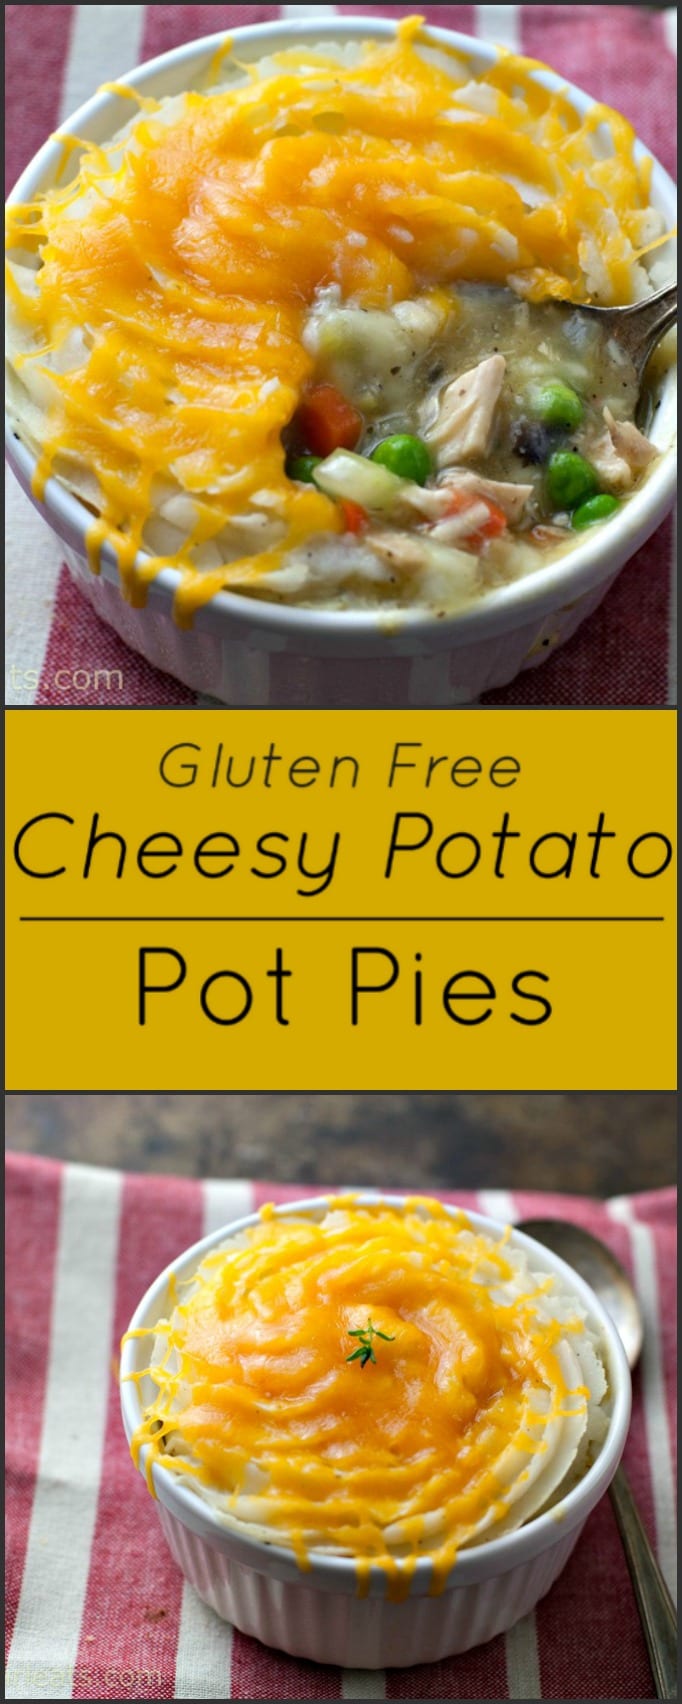 Cheesy Potato-Crusted Chicken Pot Pies - What A Girl Eats